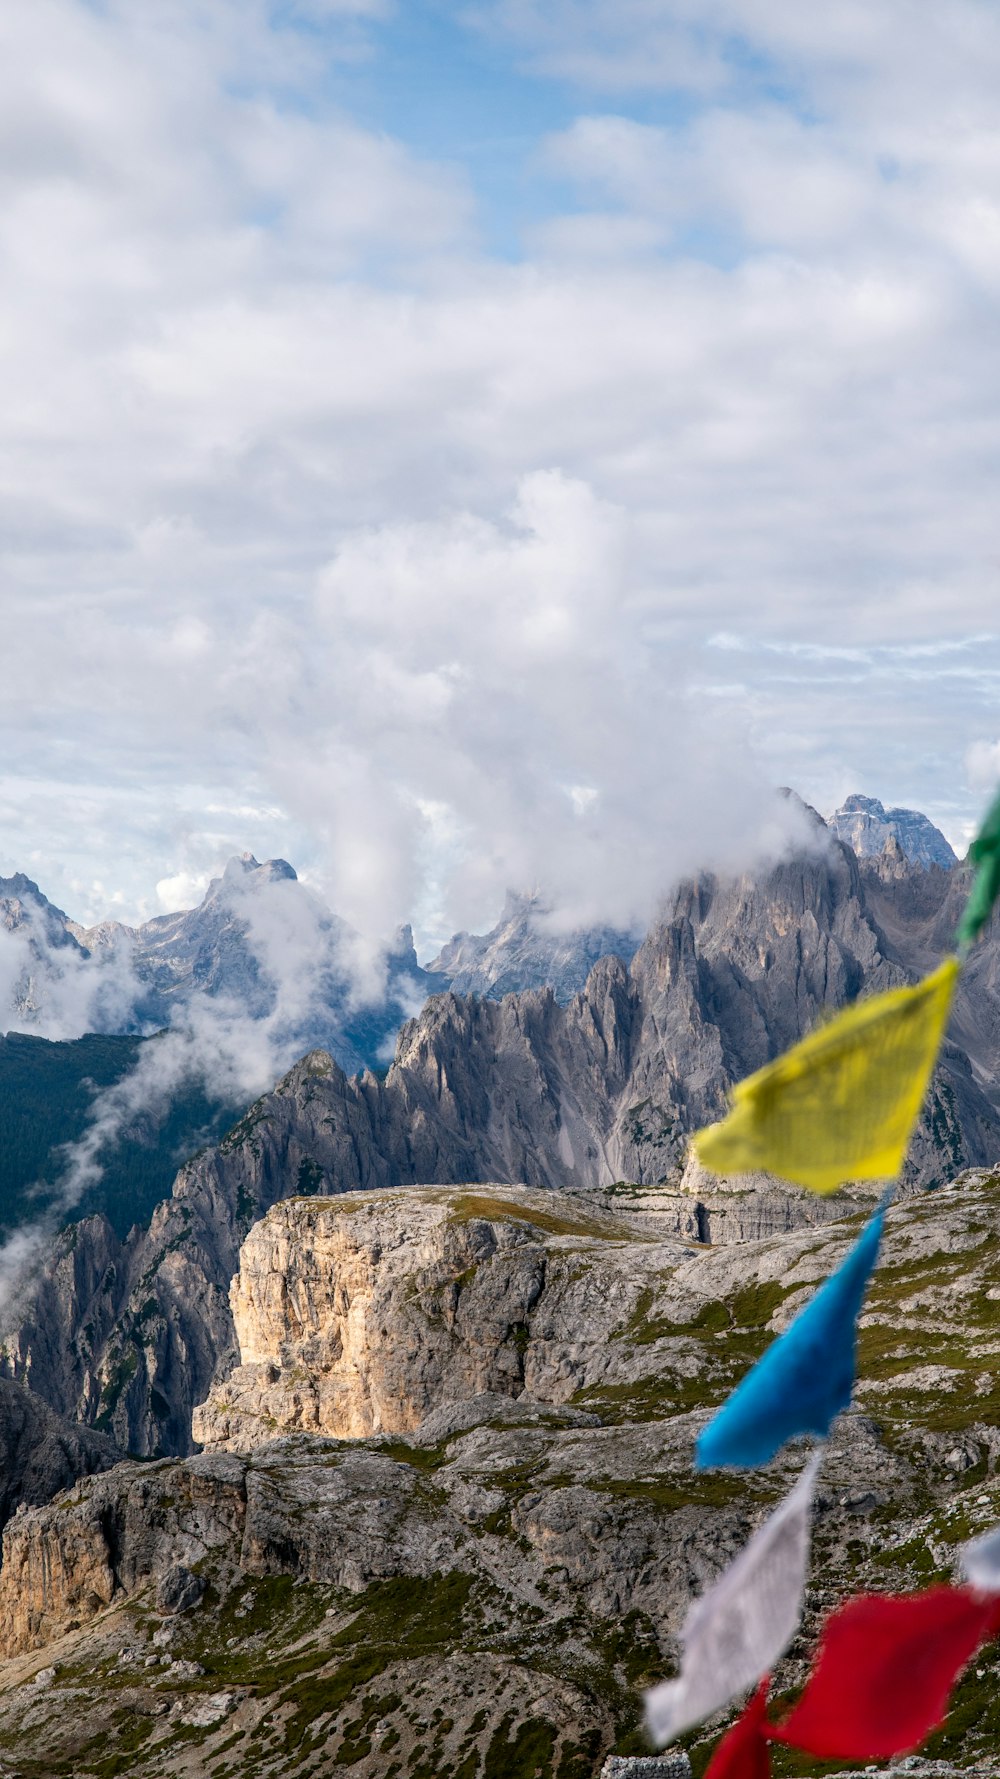 a group of flags flying in the wind on top of a mountain